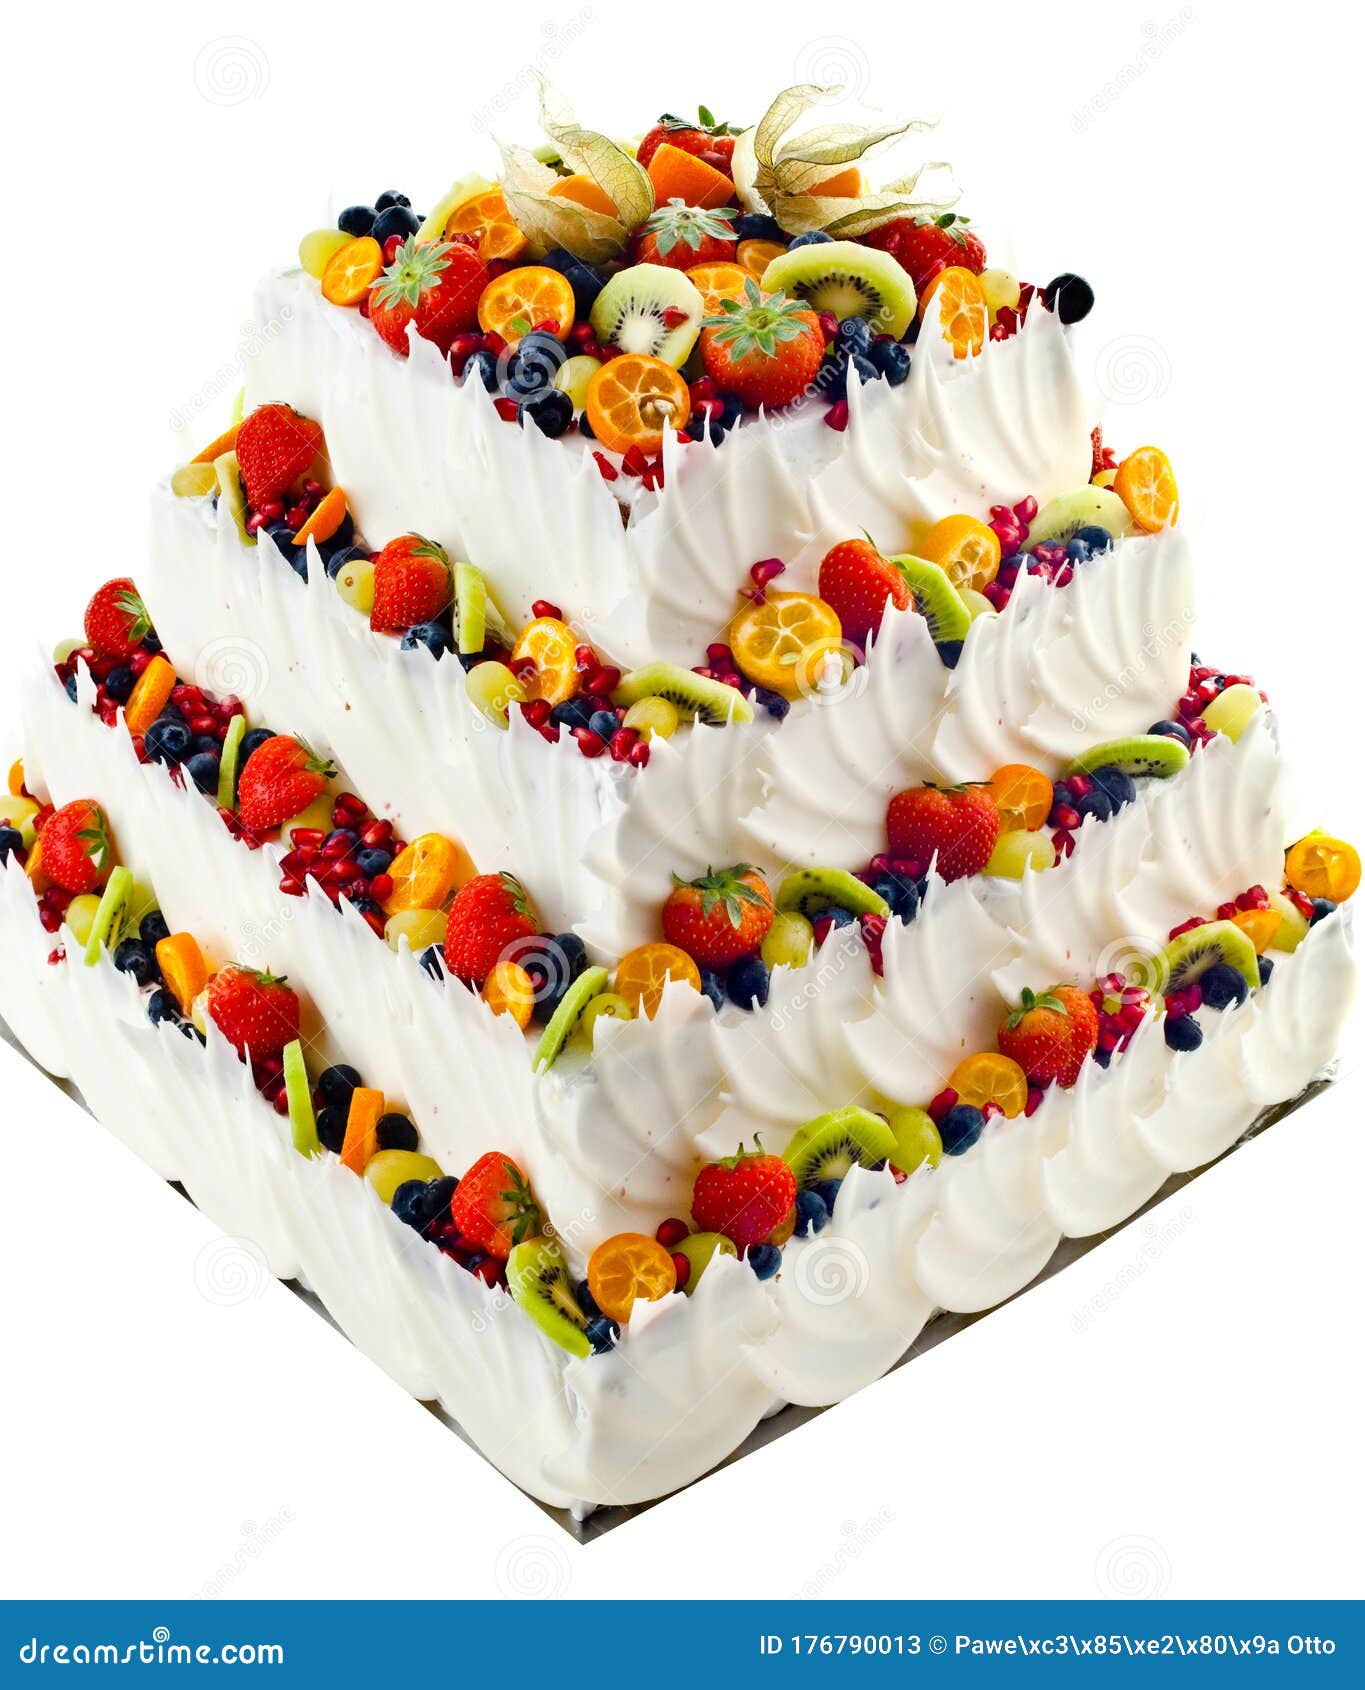 Premium Photo | Big fruit cake. cake on a wooden in a rustic style.  strawberries, blueberries, currants under the glaze.